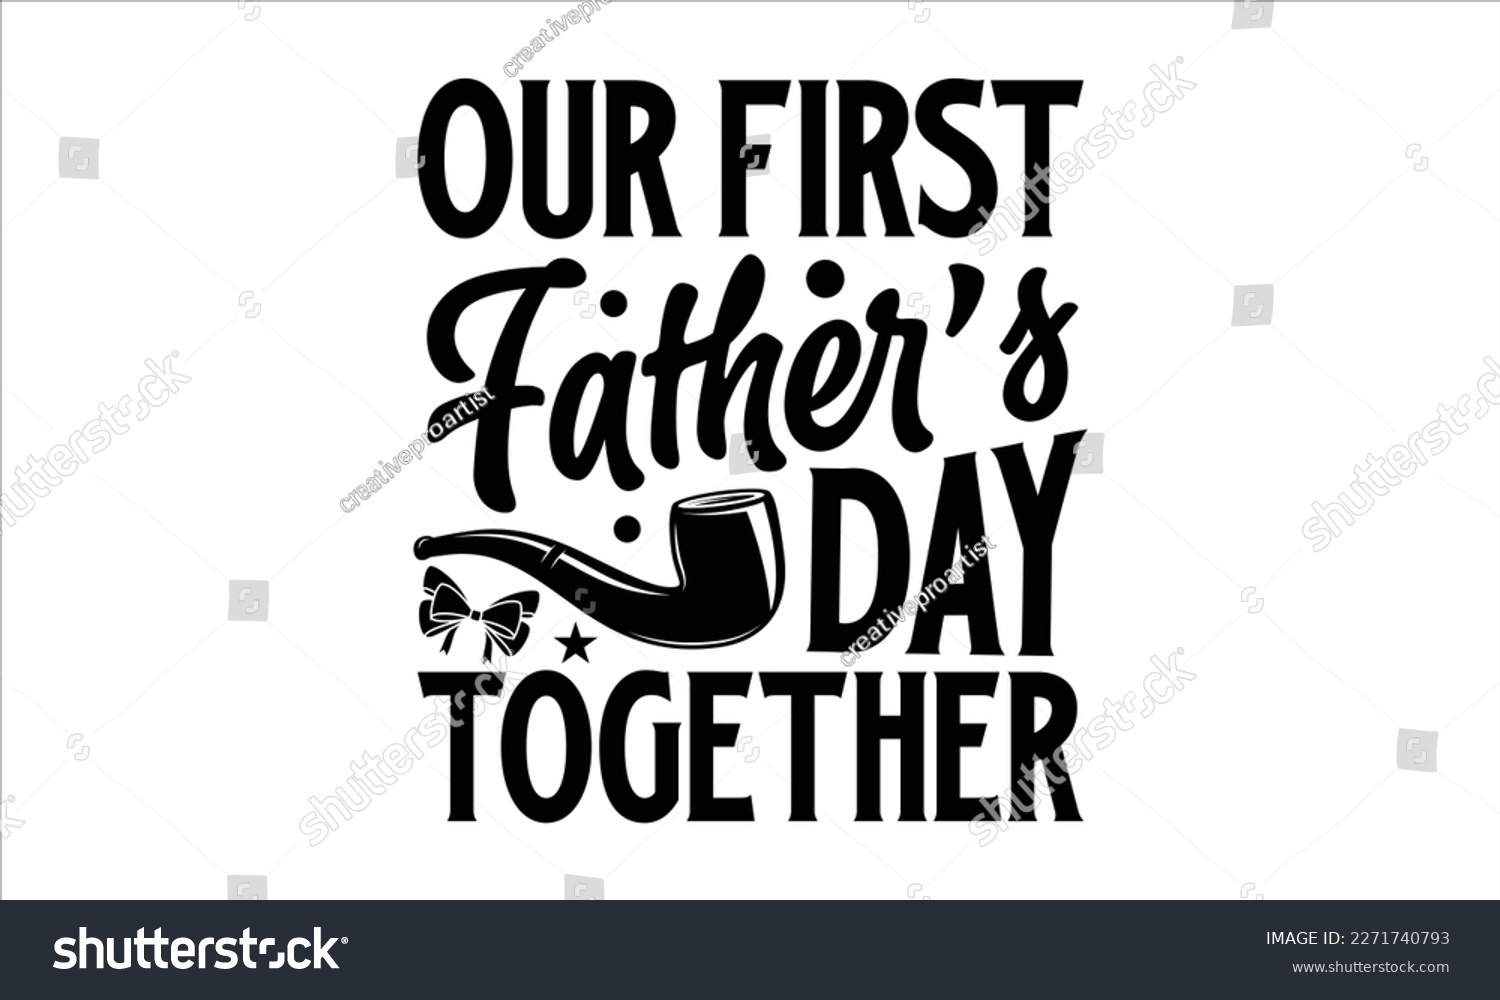 SVG of Our first father’s day together- Father's Day svg design, Hand drawn lettering phrase isolated on white background, Illustration for prints on t-shirts and bags, posters, cards eps 10. svg